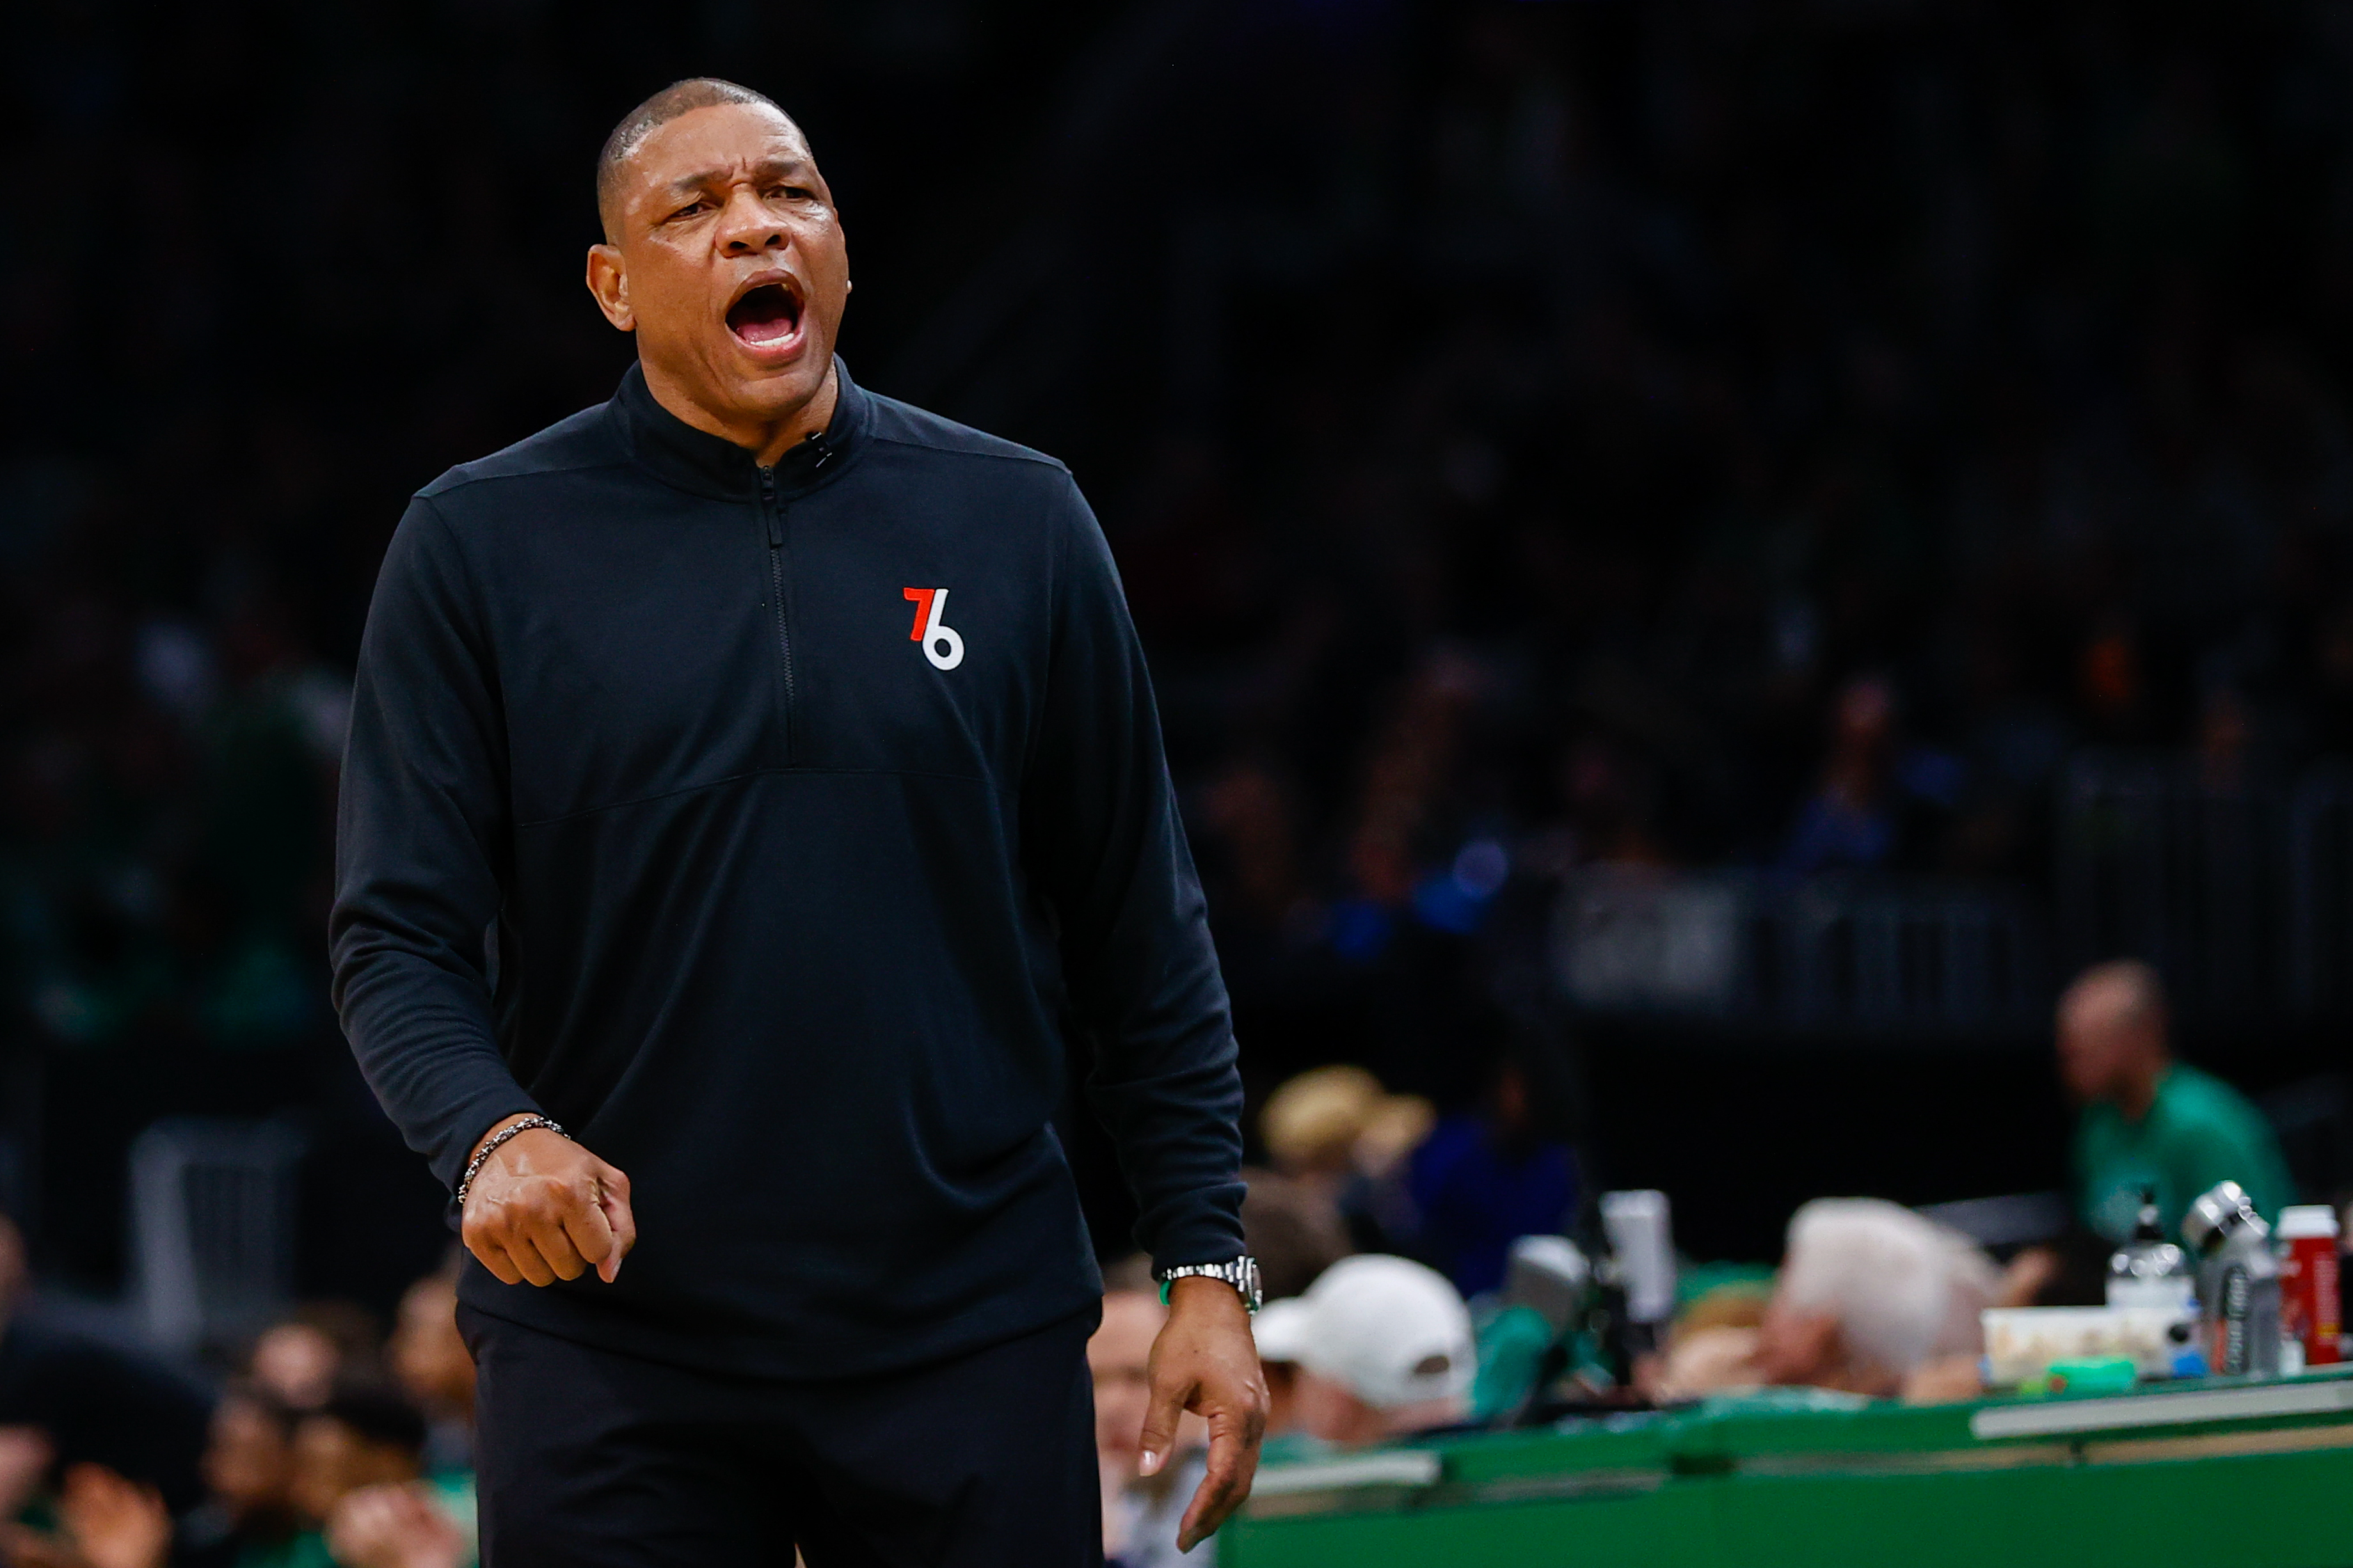 Three Of The Last Four NBA Champion Coaches Have Been Fired